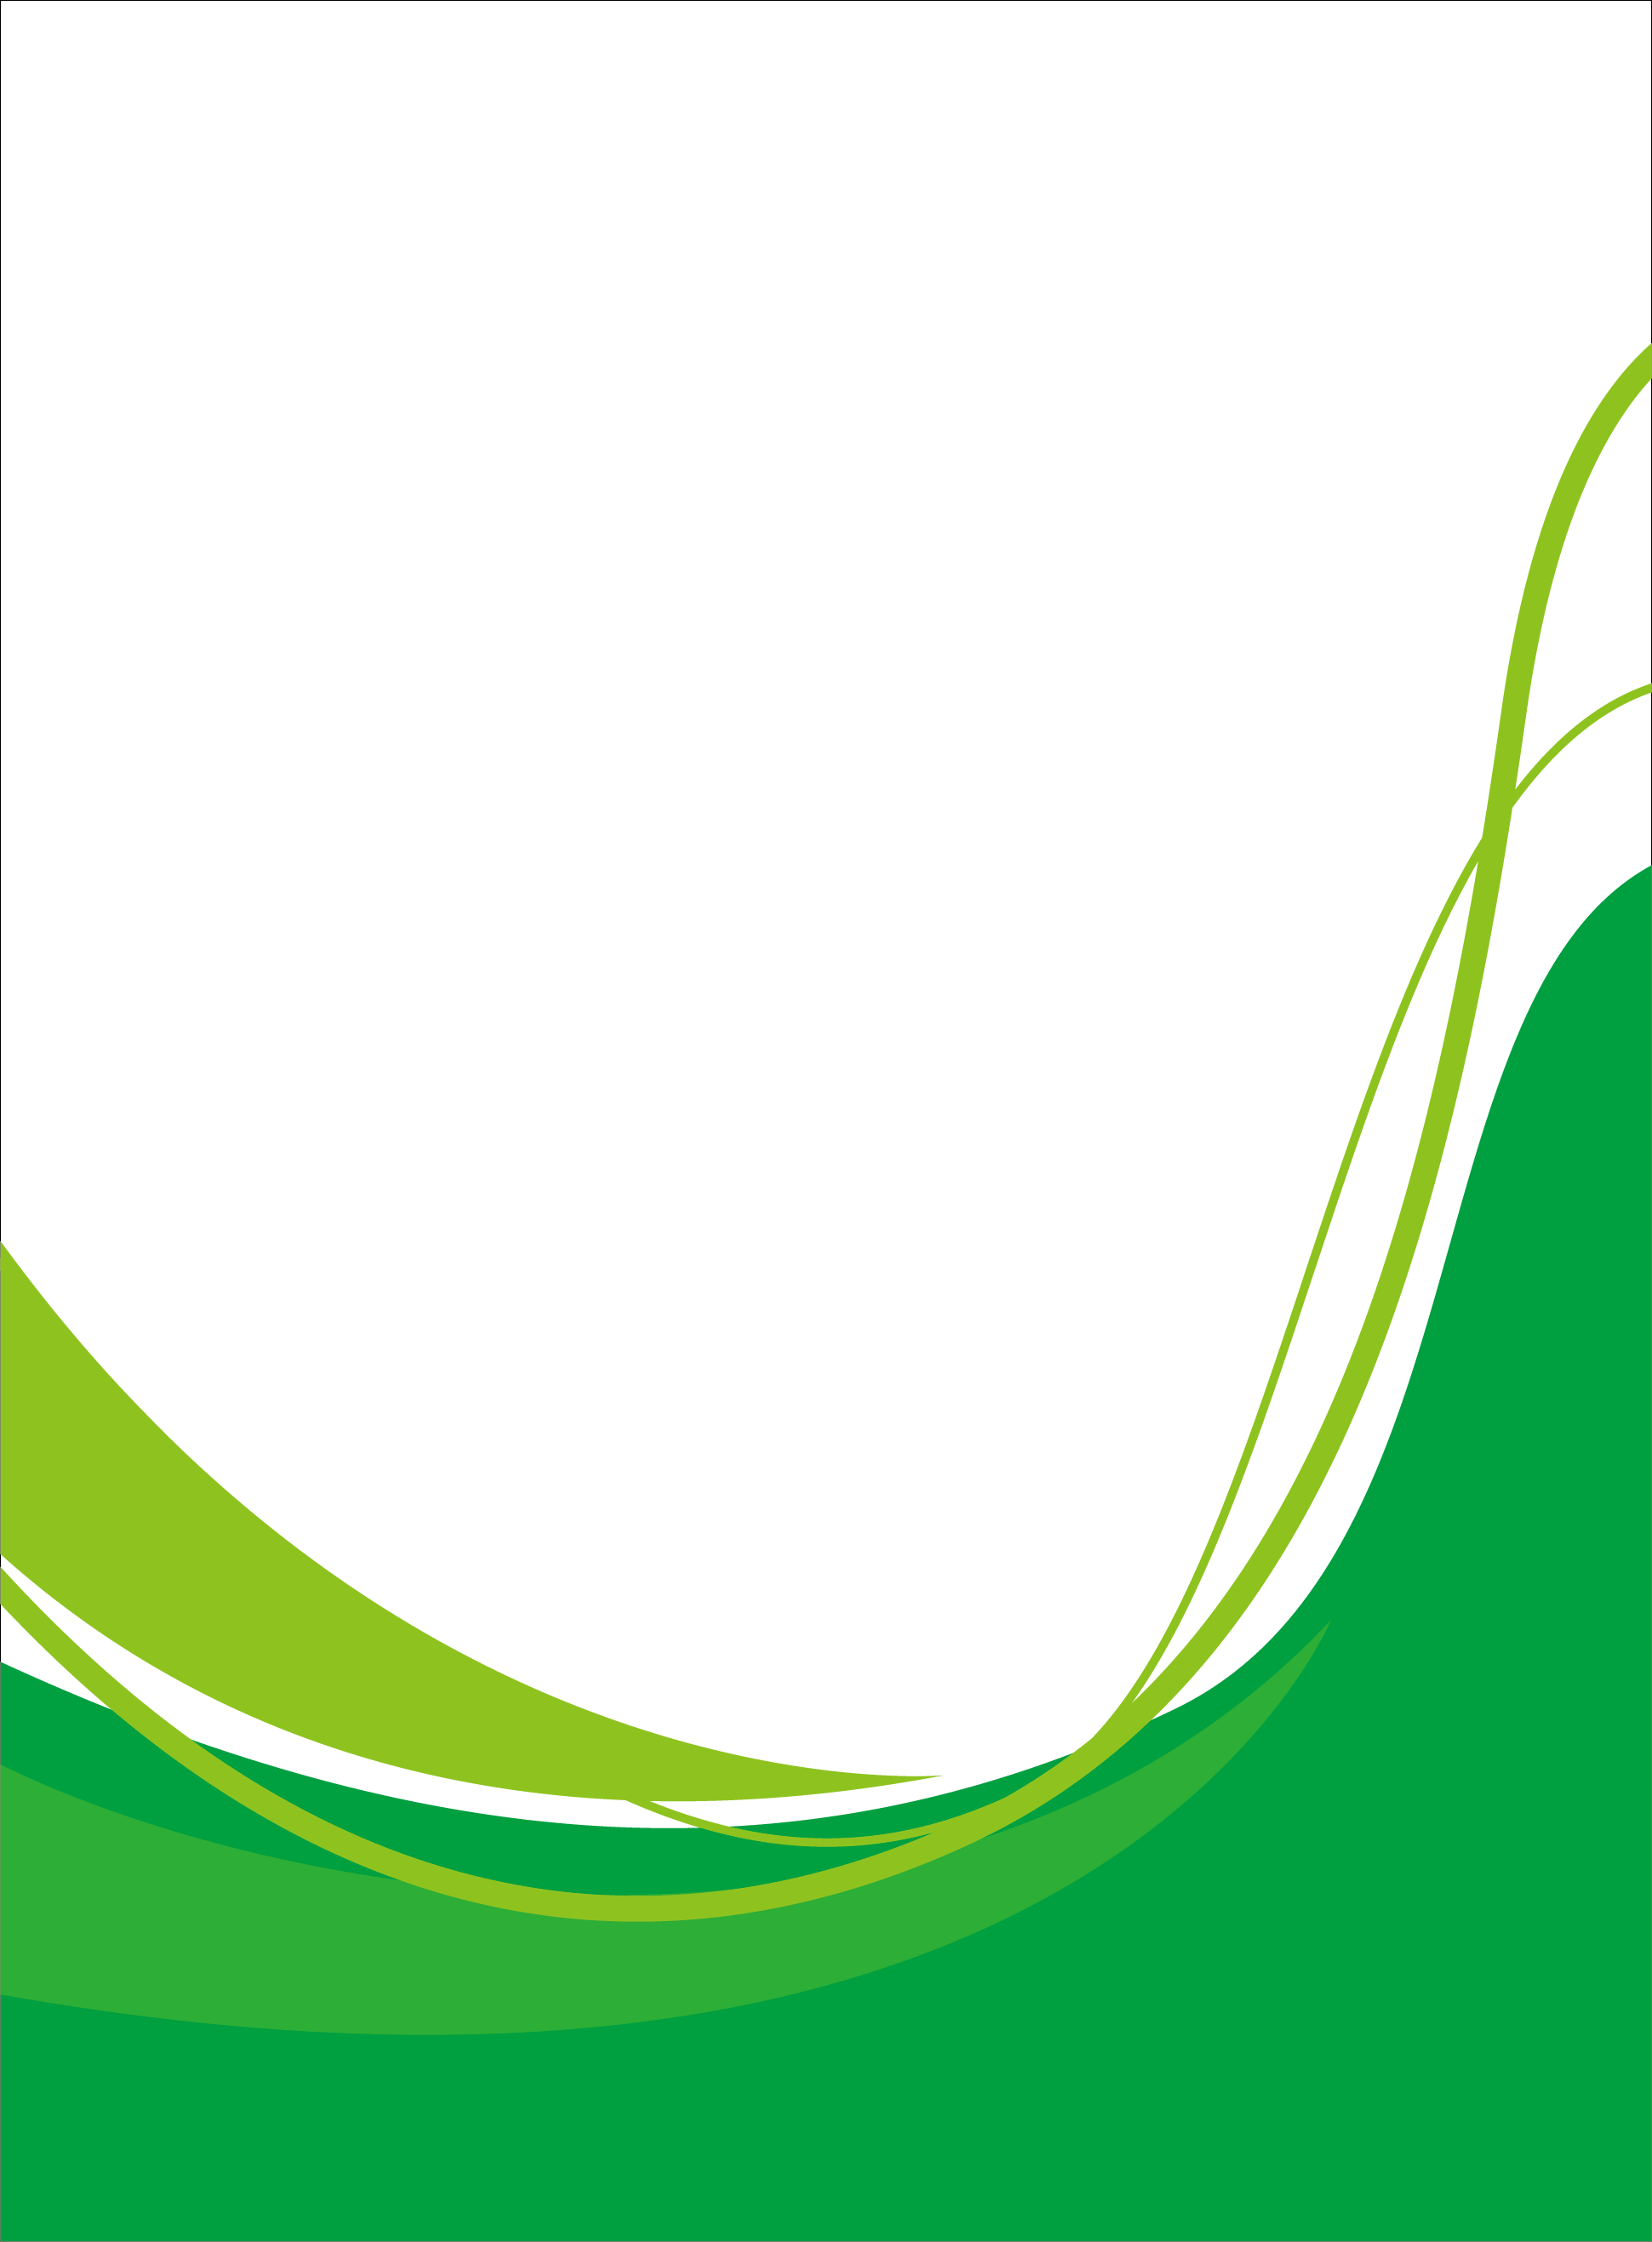 Abstract Green Wave Free Download Image PNG Image